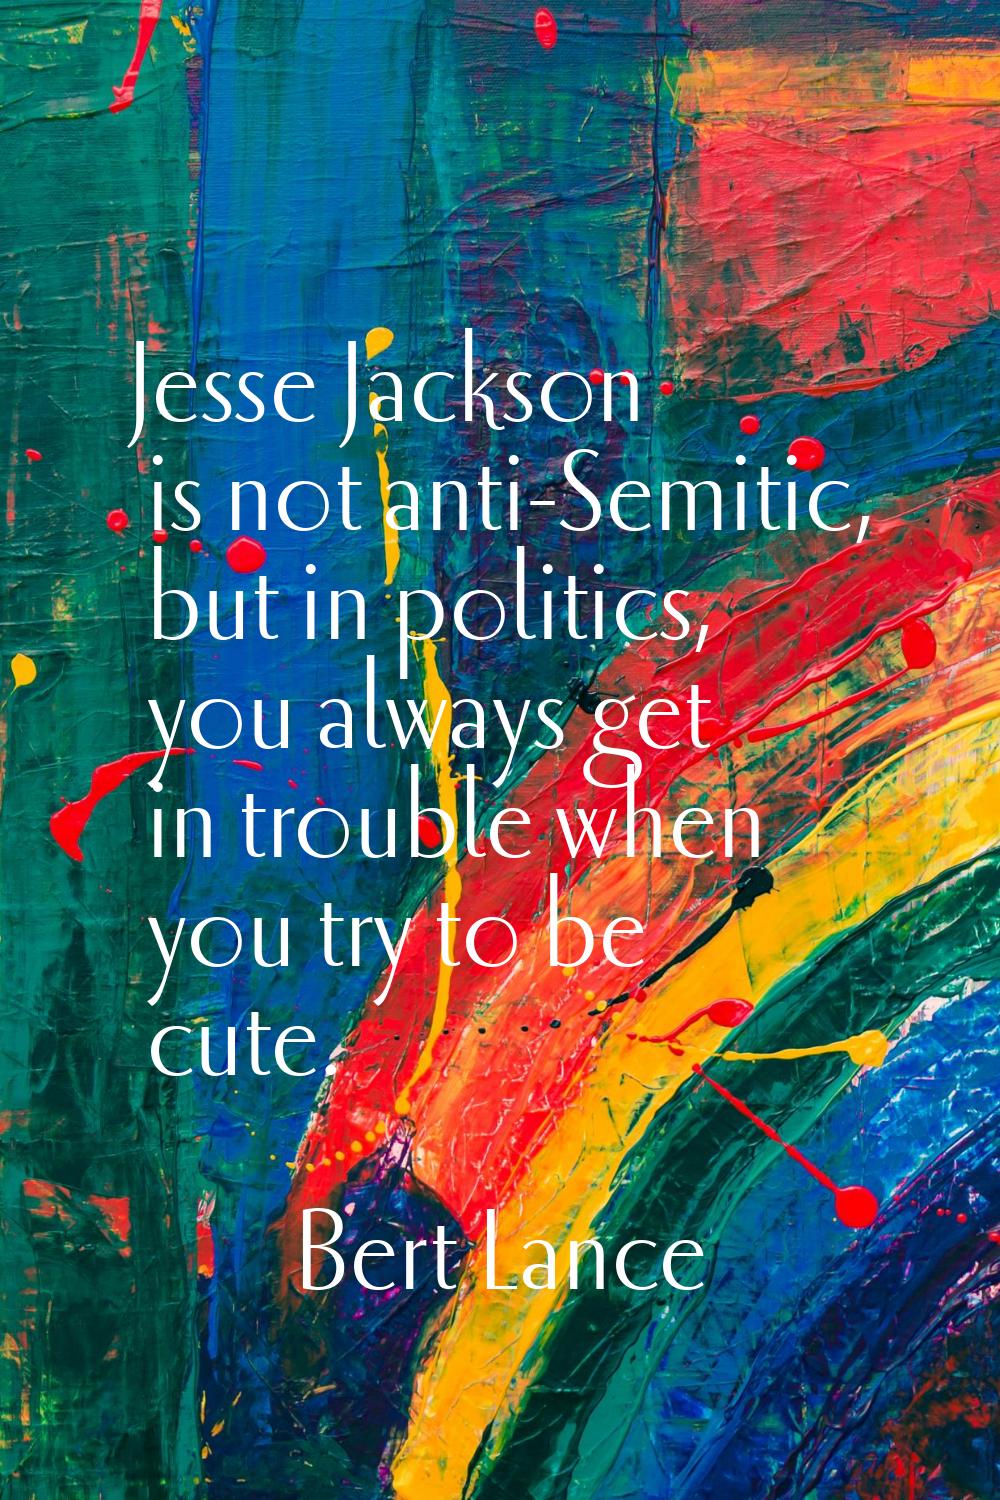 Jesse Jackson is not anti-Semitic, but in politics, you always get in trouble when you try to be cu